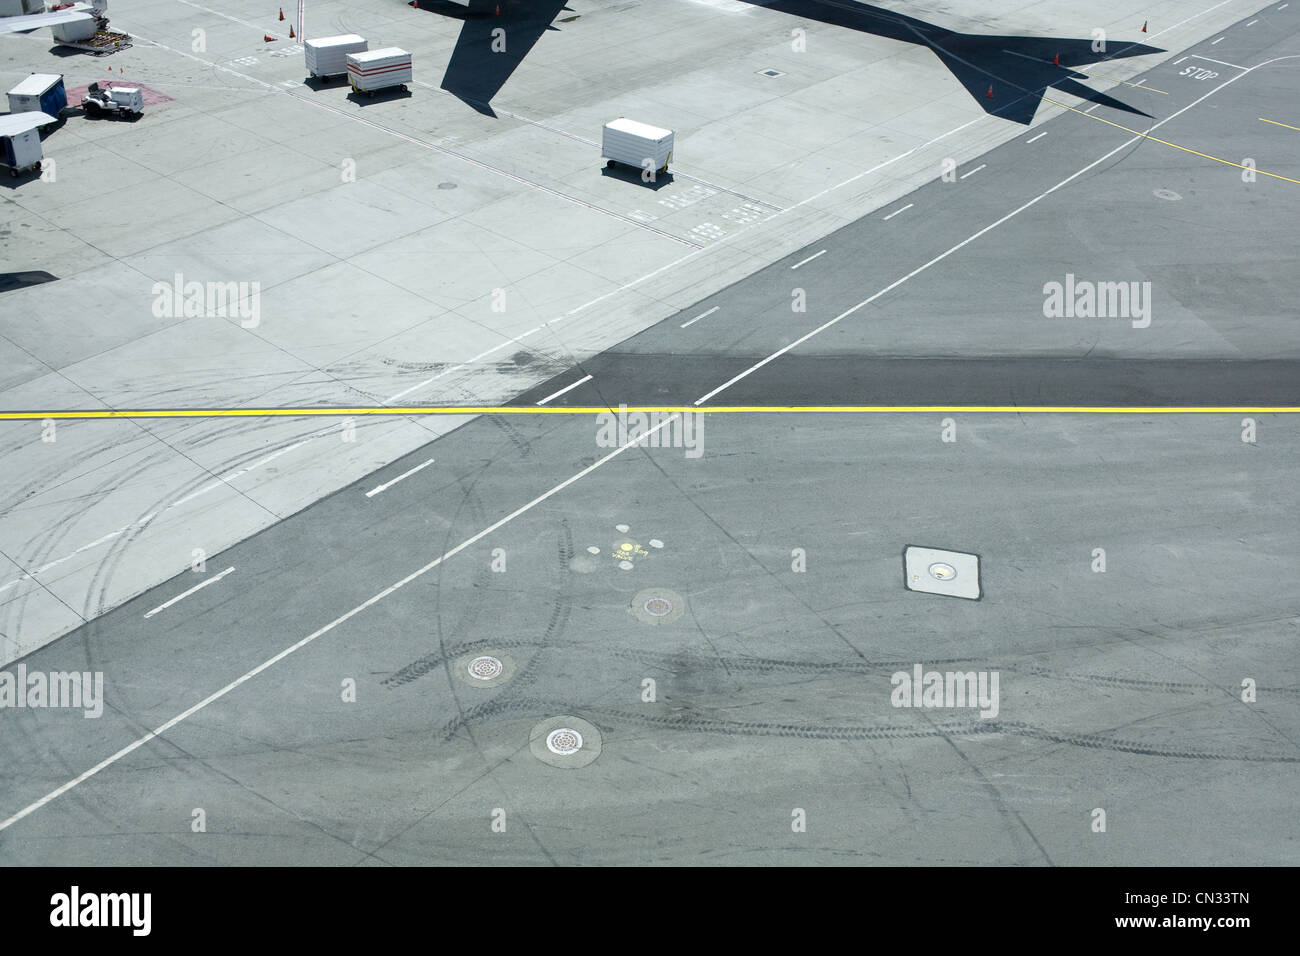 Airport runway with shadow of plane Stock Photo